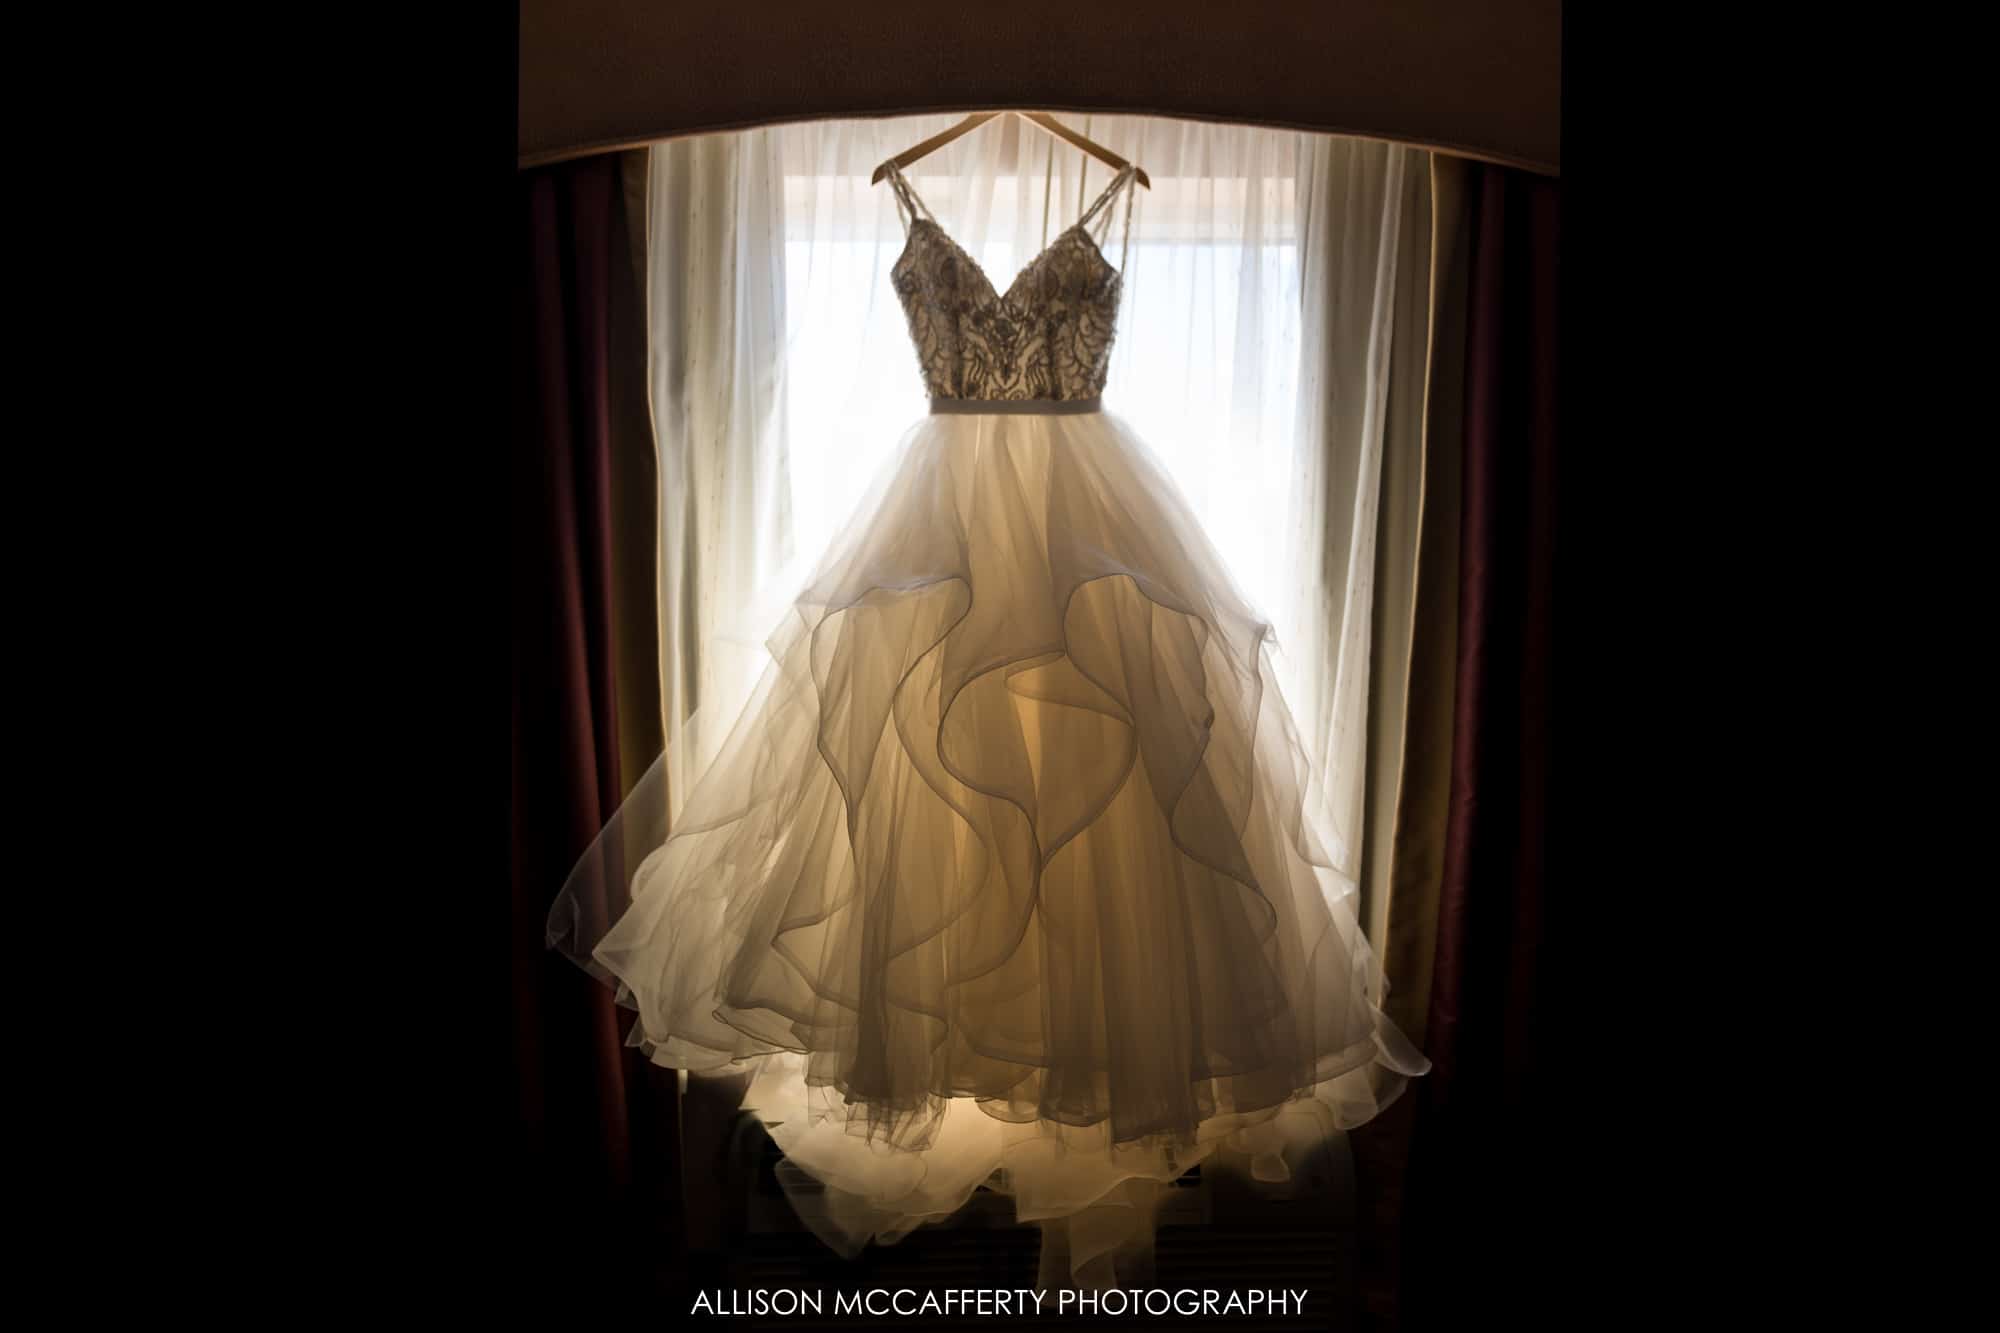 Wedding gown hanging in front of a window